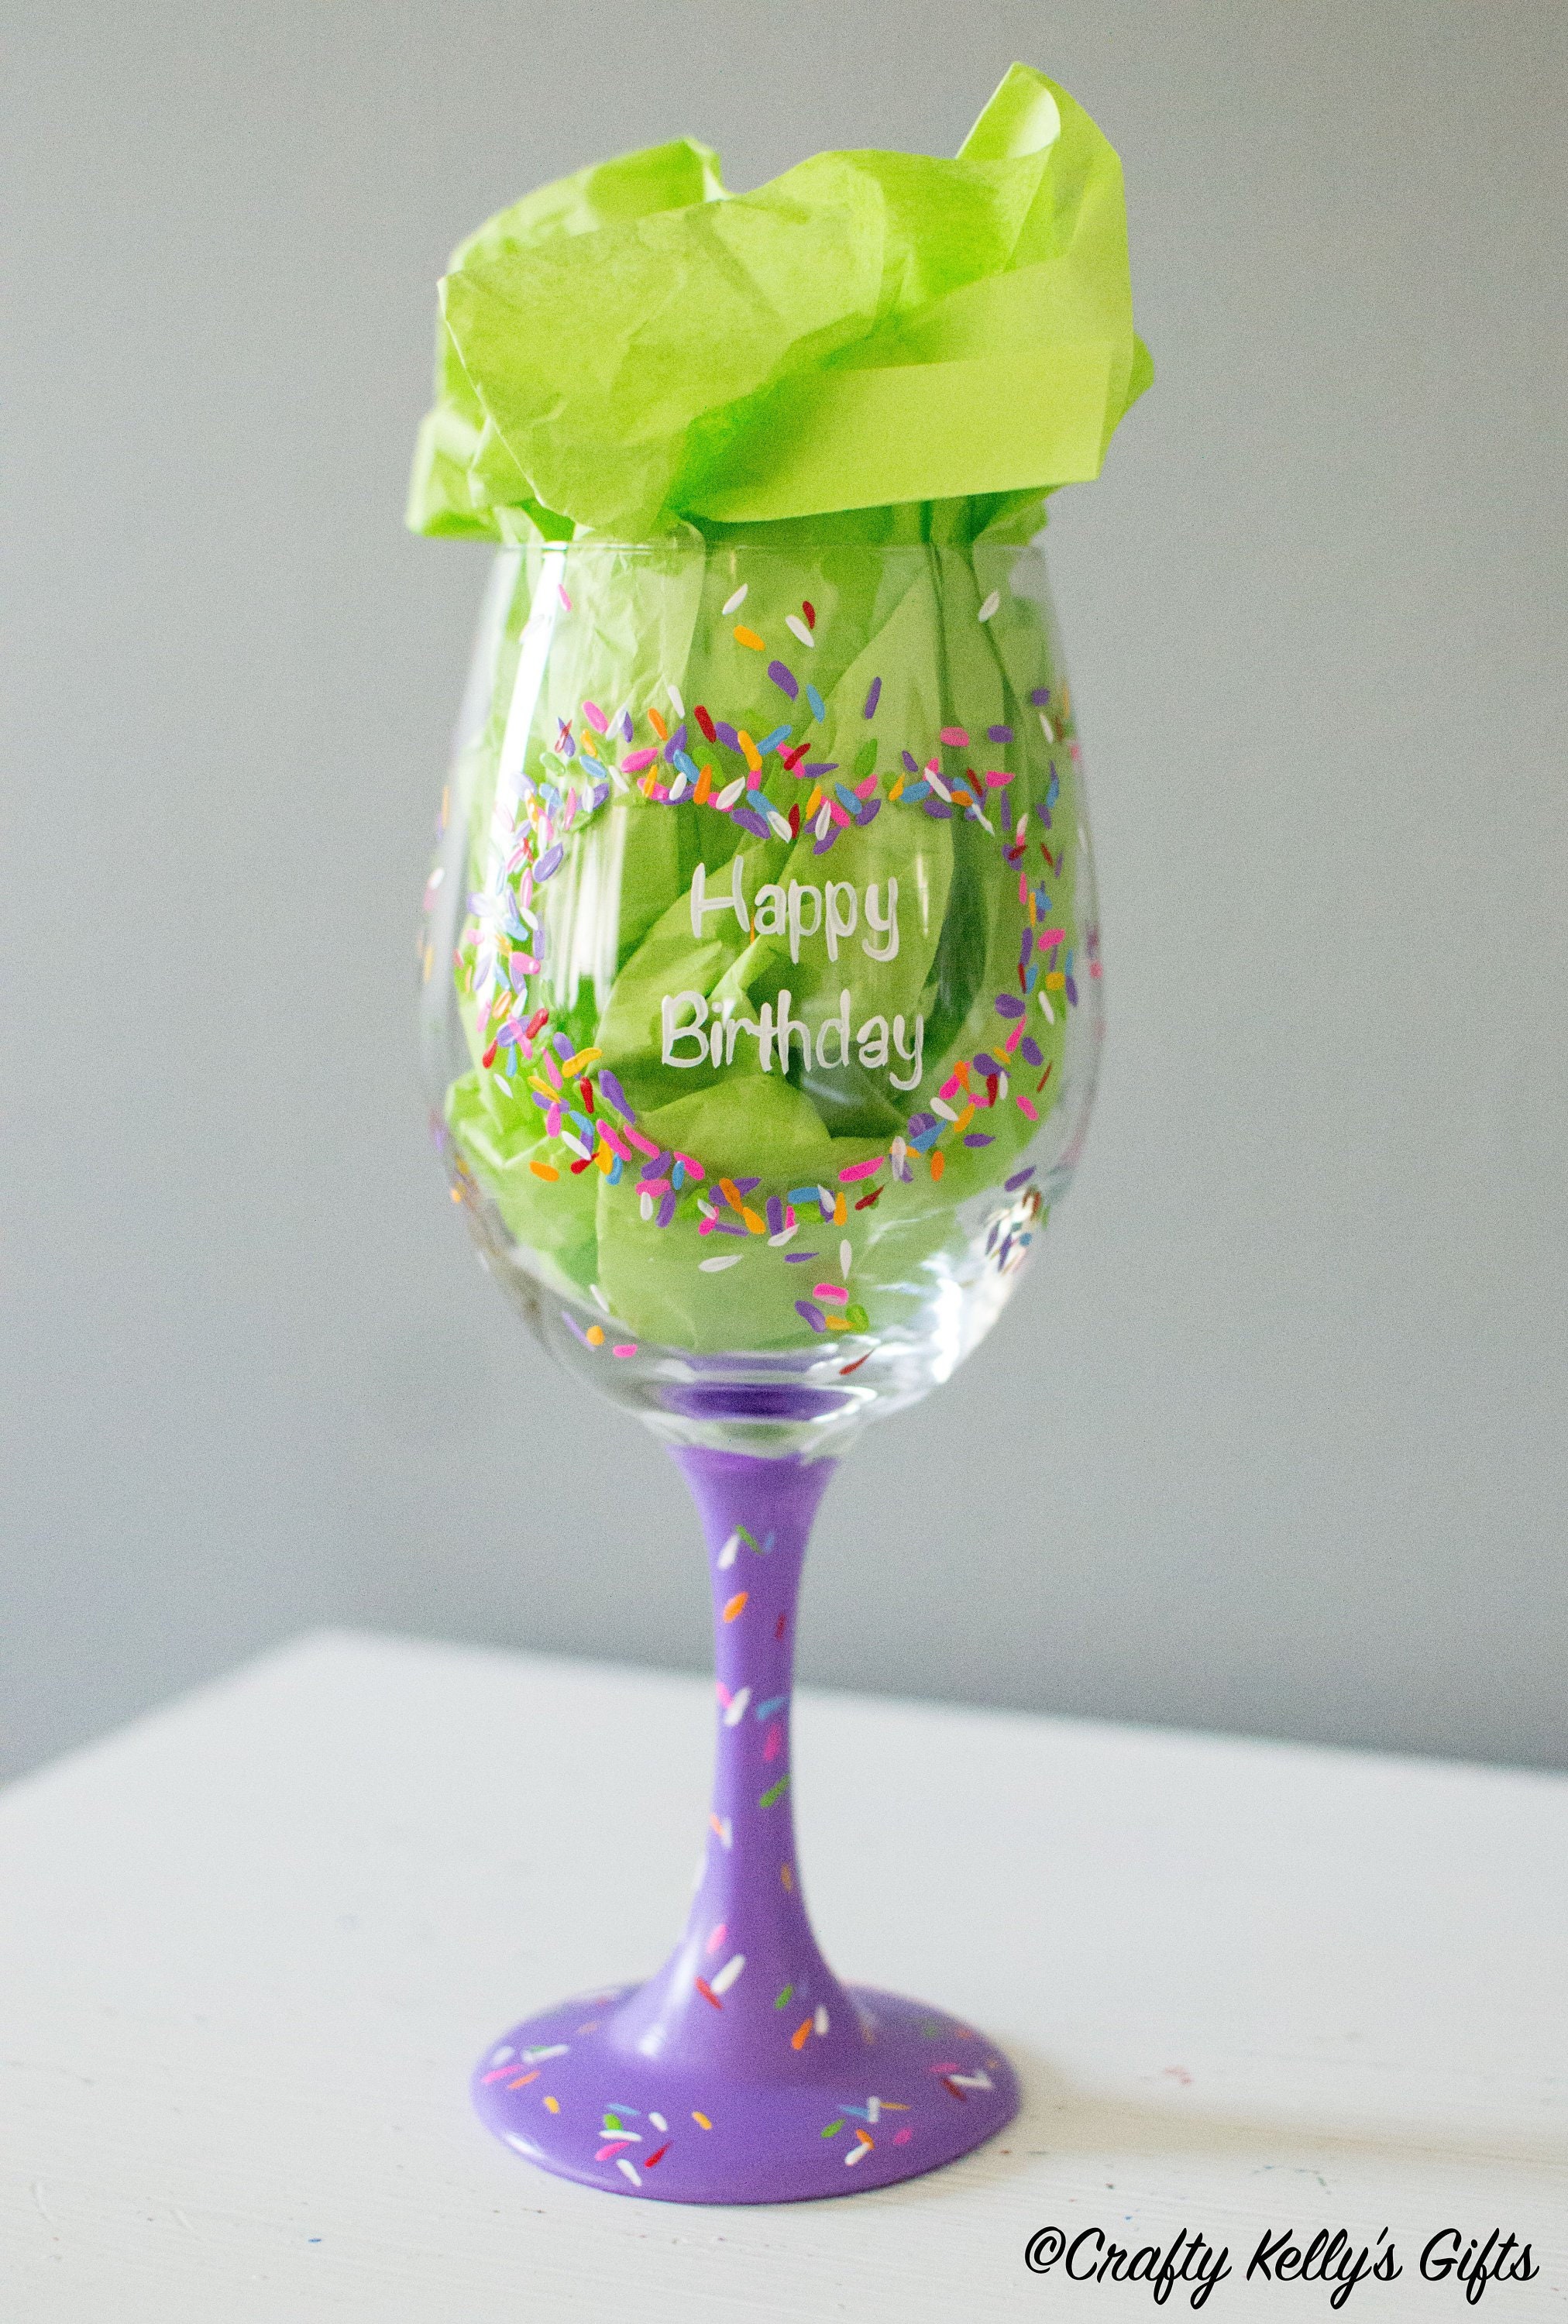 gift for mom 21st birthday Wine Glass Personalized birthday gift Hand Painted Wine Glass Birthday wine glass Bridesmaid proposal gift